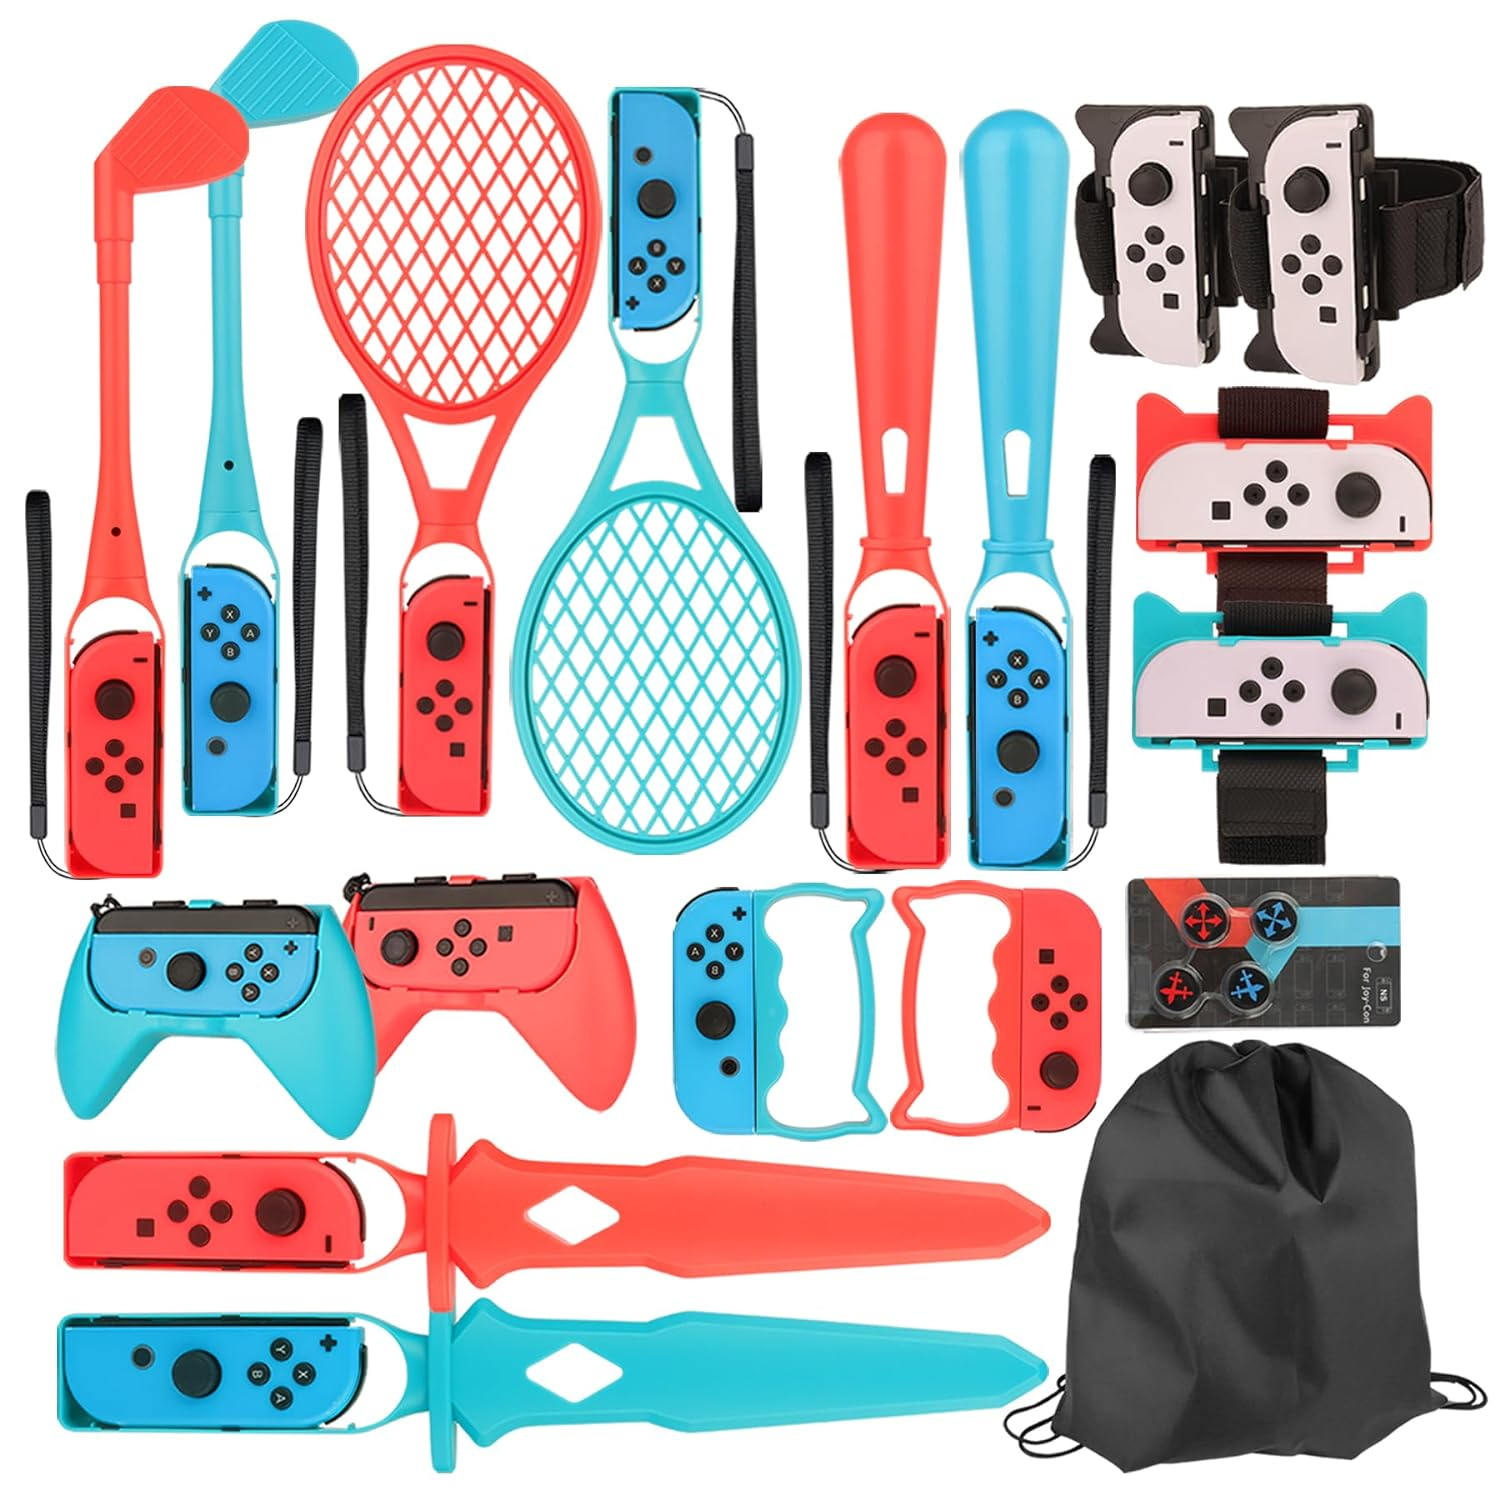 EOVOLA 18 in 1 Accessories Kit for Nintendo Switch / OLED Sports Games, Tennis Rackets, Comfort Grips Golf Clubs, Swords, Wrist Bands and Leg Strap Etc.-With Storage Bag